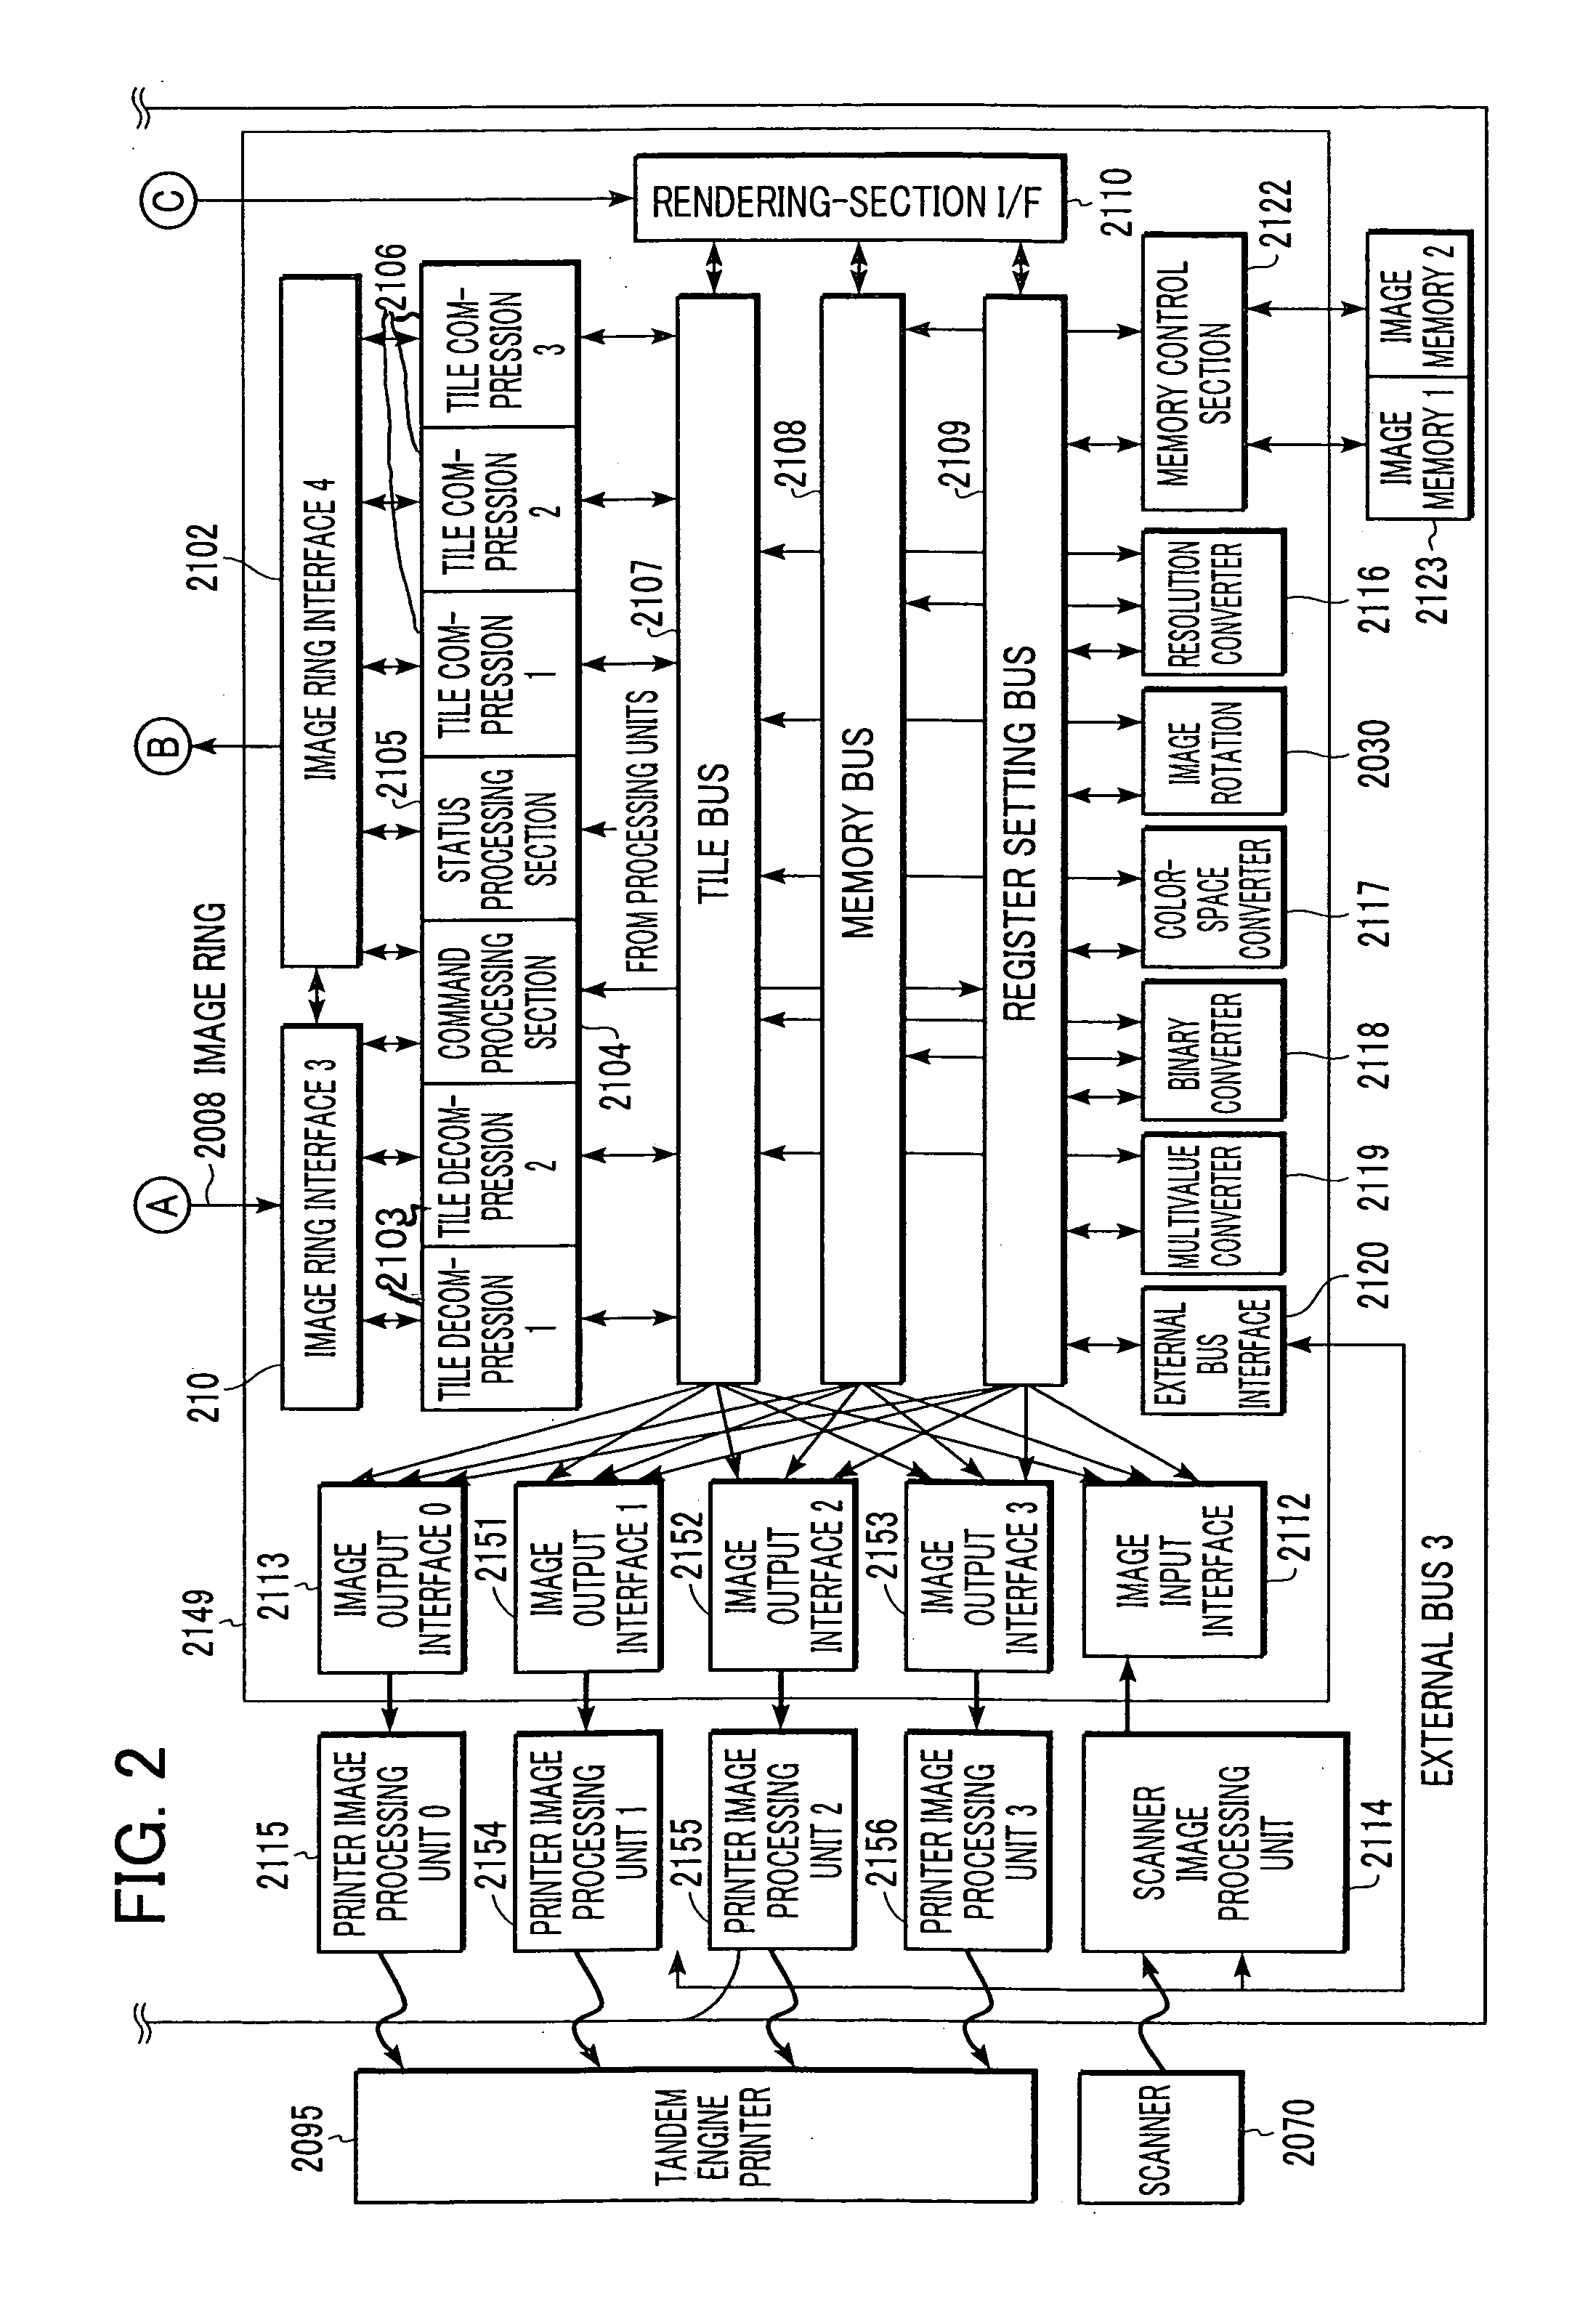 Image-forming controller, method therefor, program, and storage medium